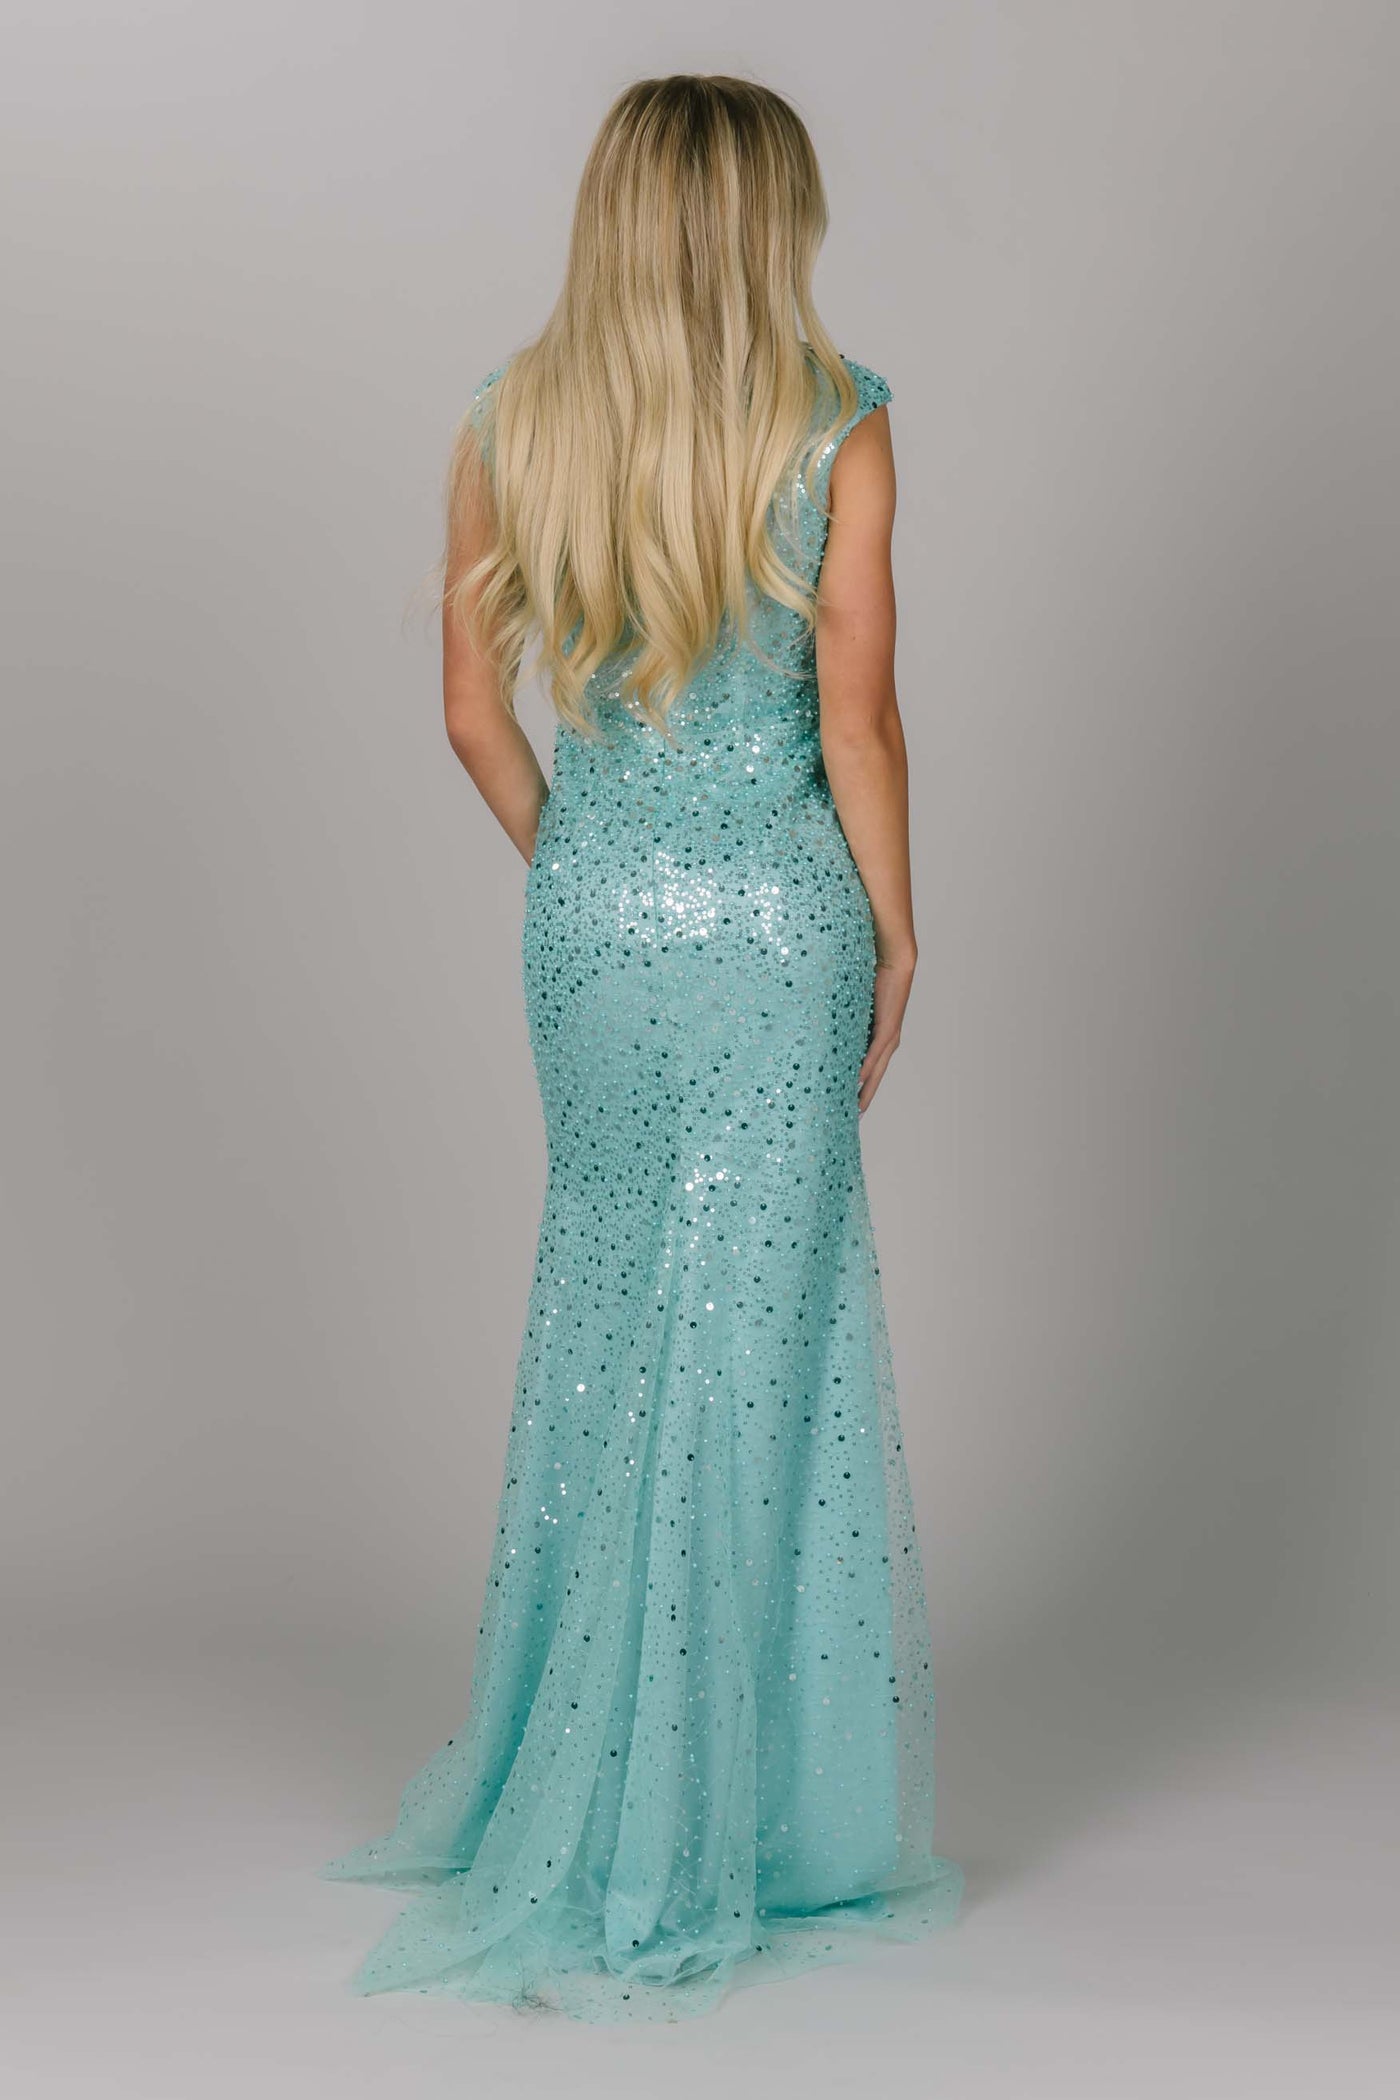 Blue sparkly modest prom dress. This dress has cap sleeves and is a fitted modest dress. This light blue dress is our new favorite modest prom dress.